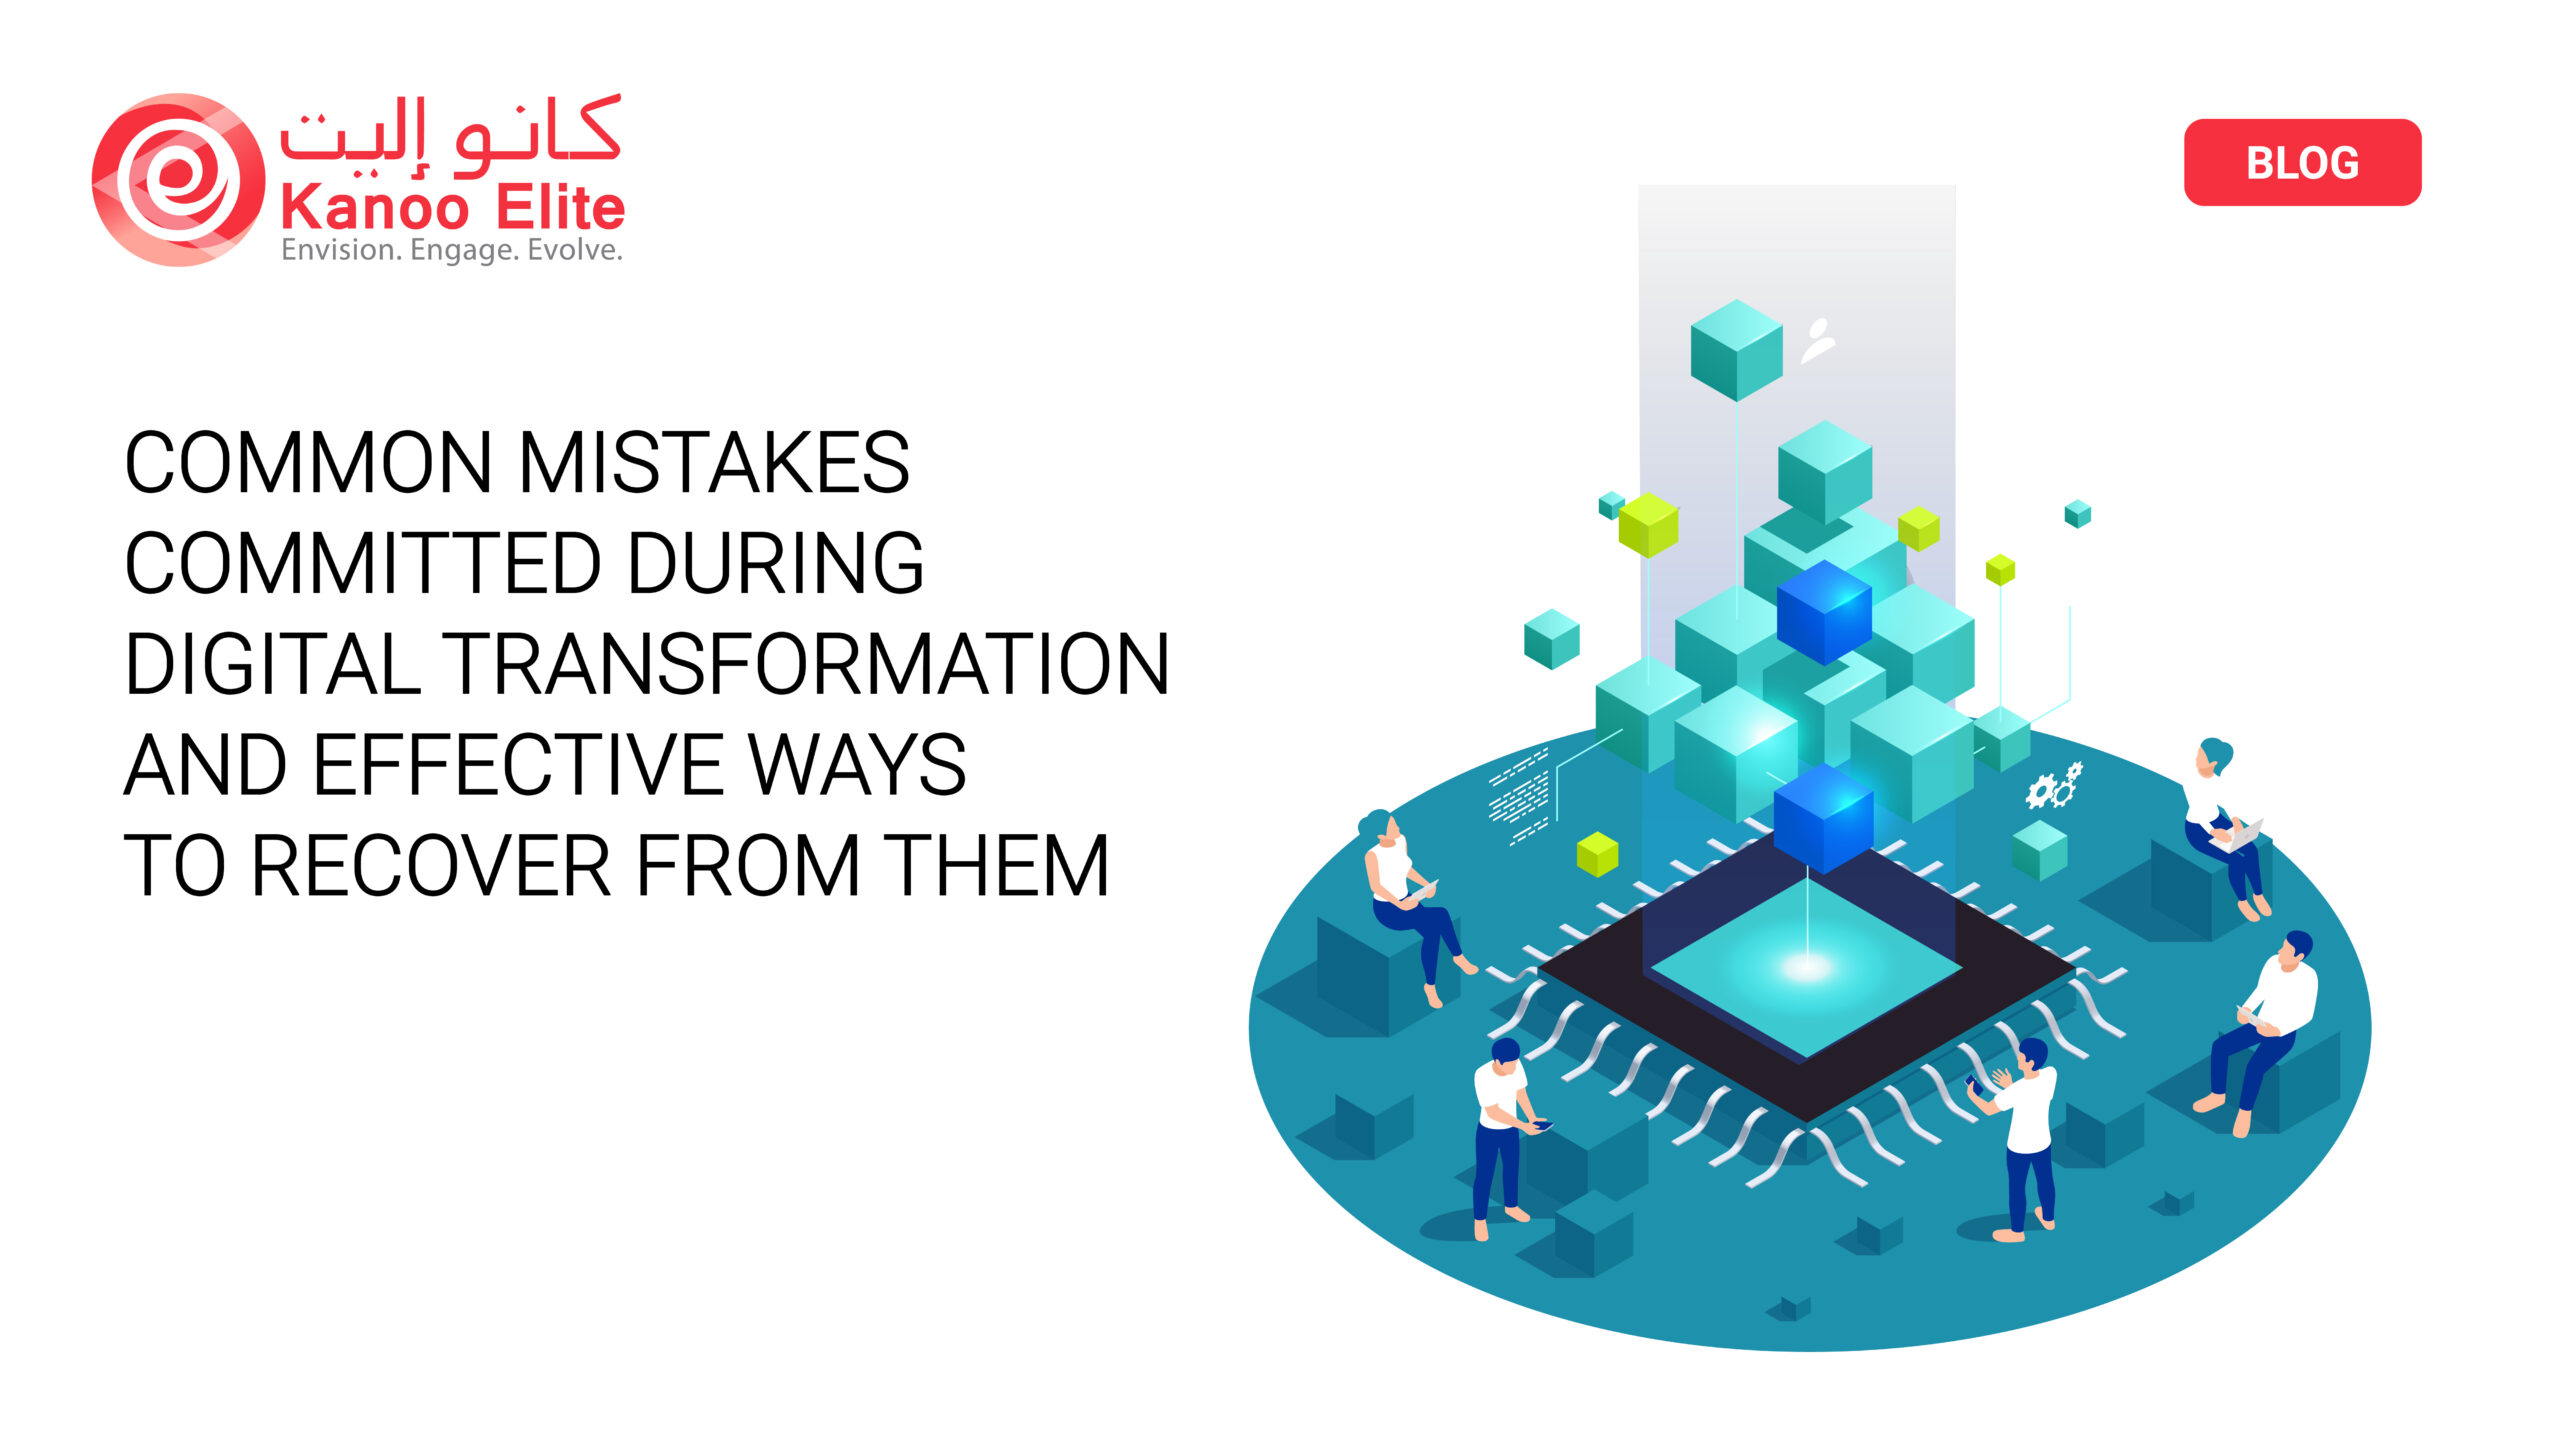 Common Mistakes Committed During Digital Transformation and Effective Ways to Recover from Them